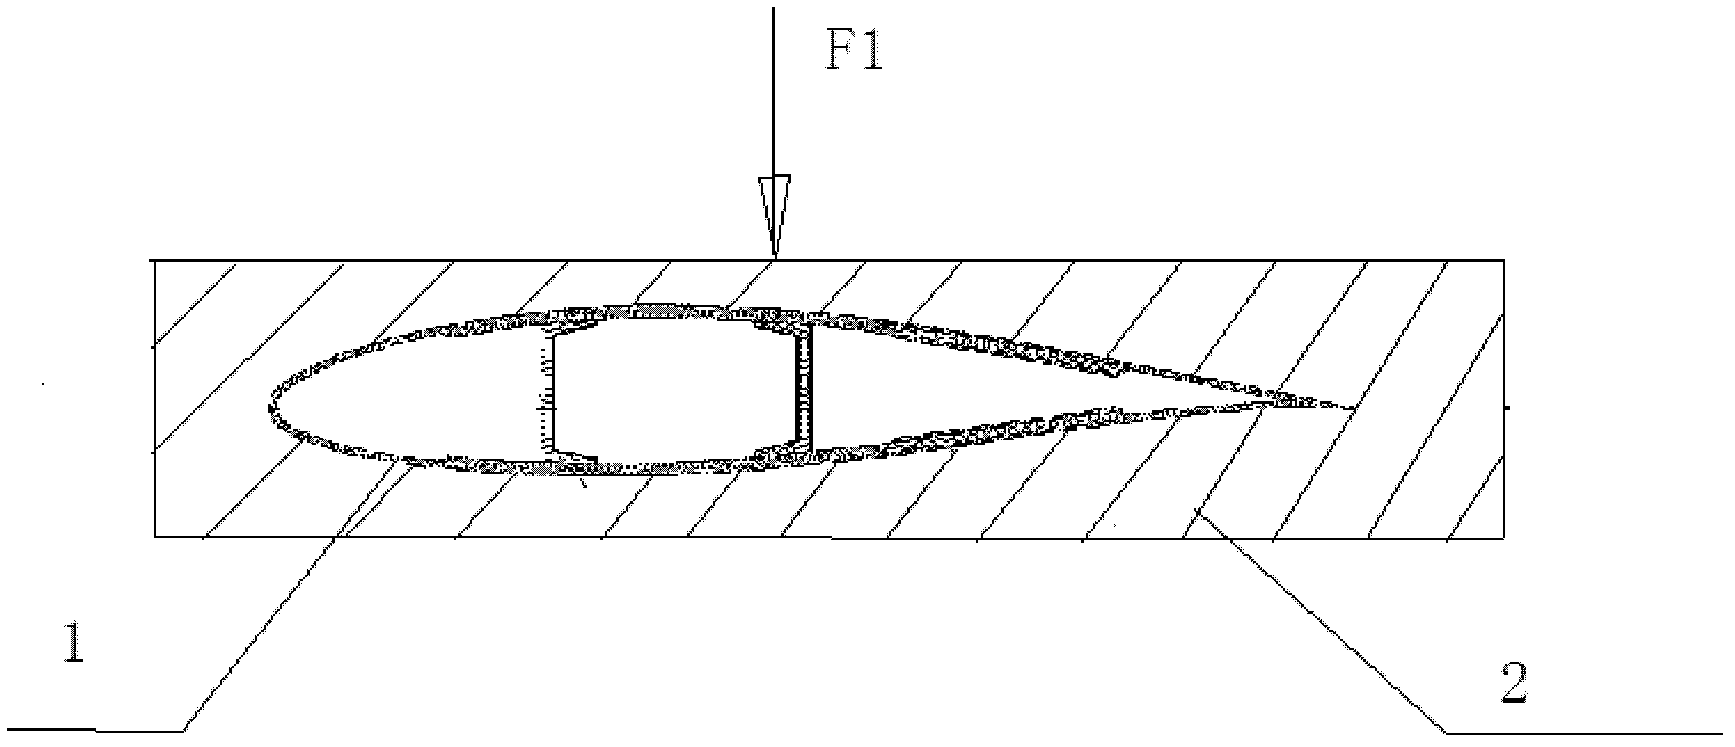 Method for detecting fatigue damage of blade of horizontal axis wind turbine